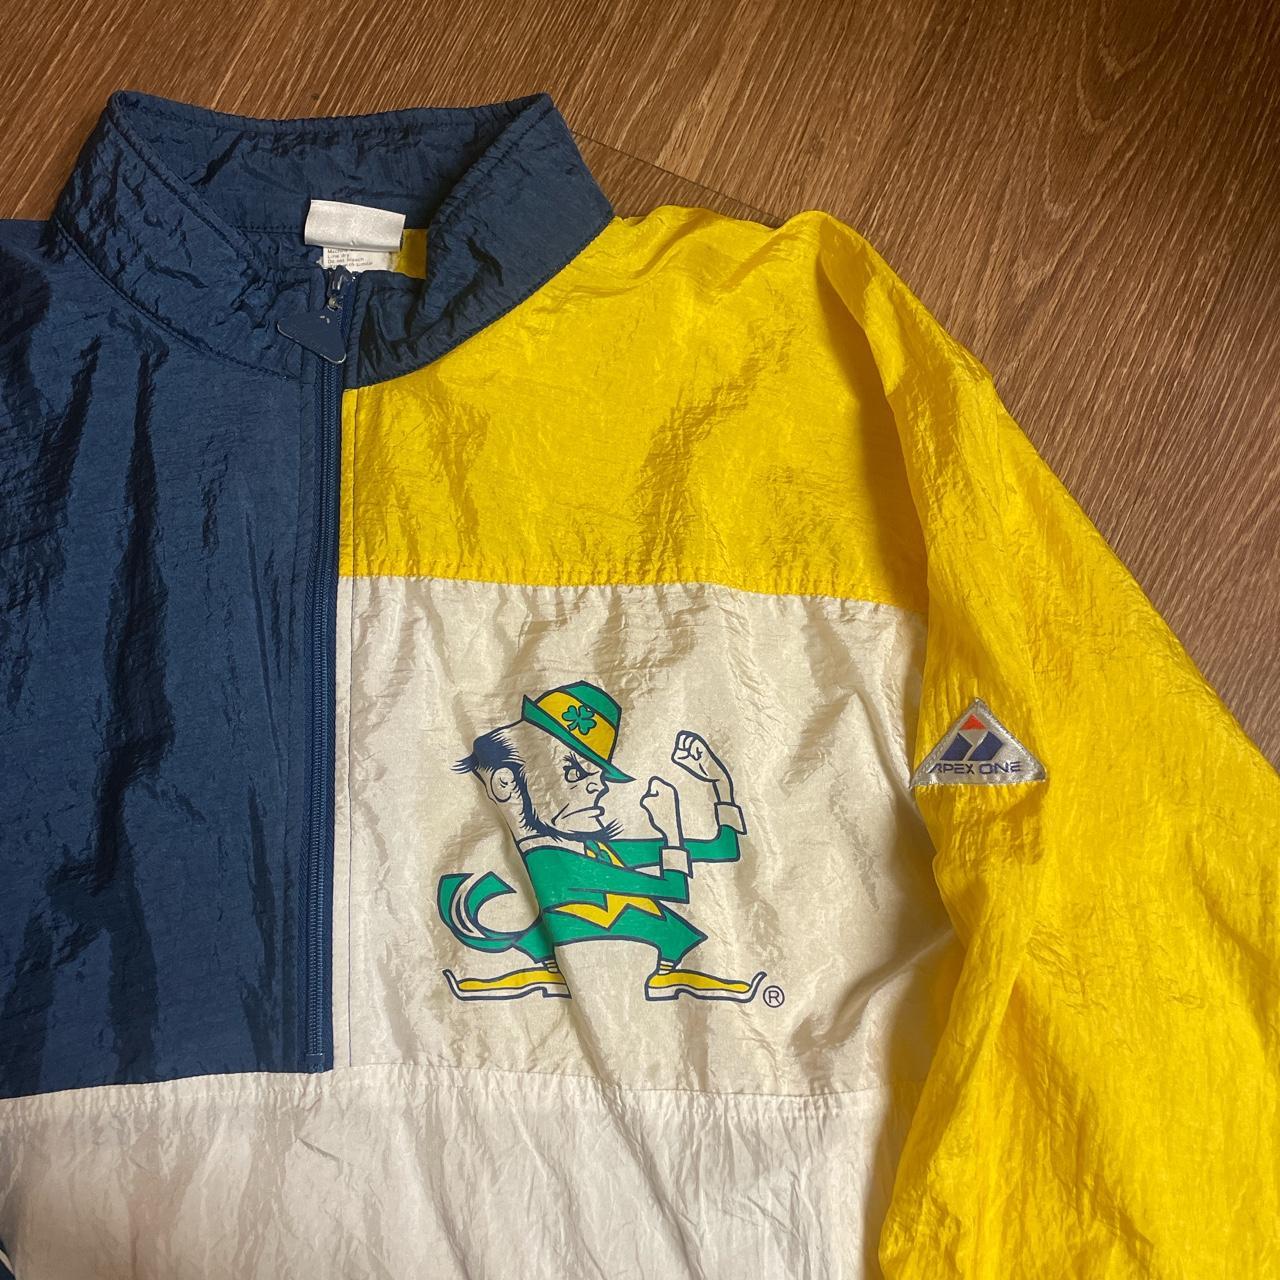 American Vintage Men's Yellow and Navy Jacket (2)